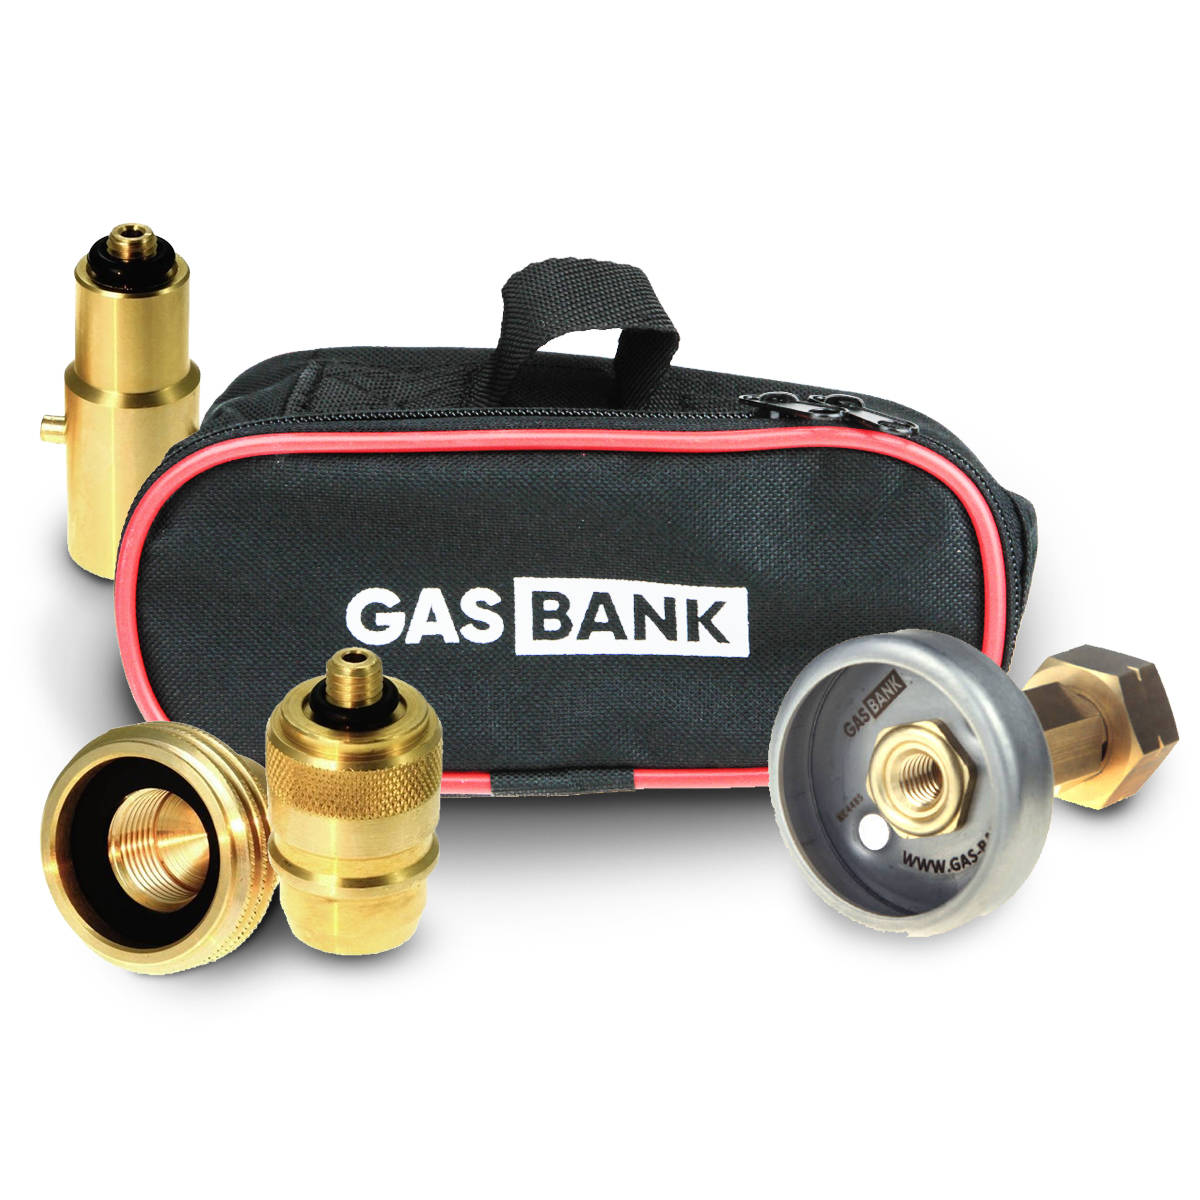 Set of nozzles for refuelling throughout Europe - DIN with non-return valve  in a special case